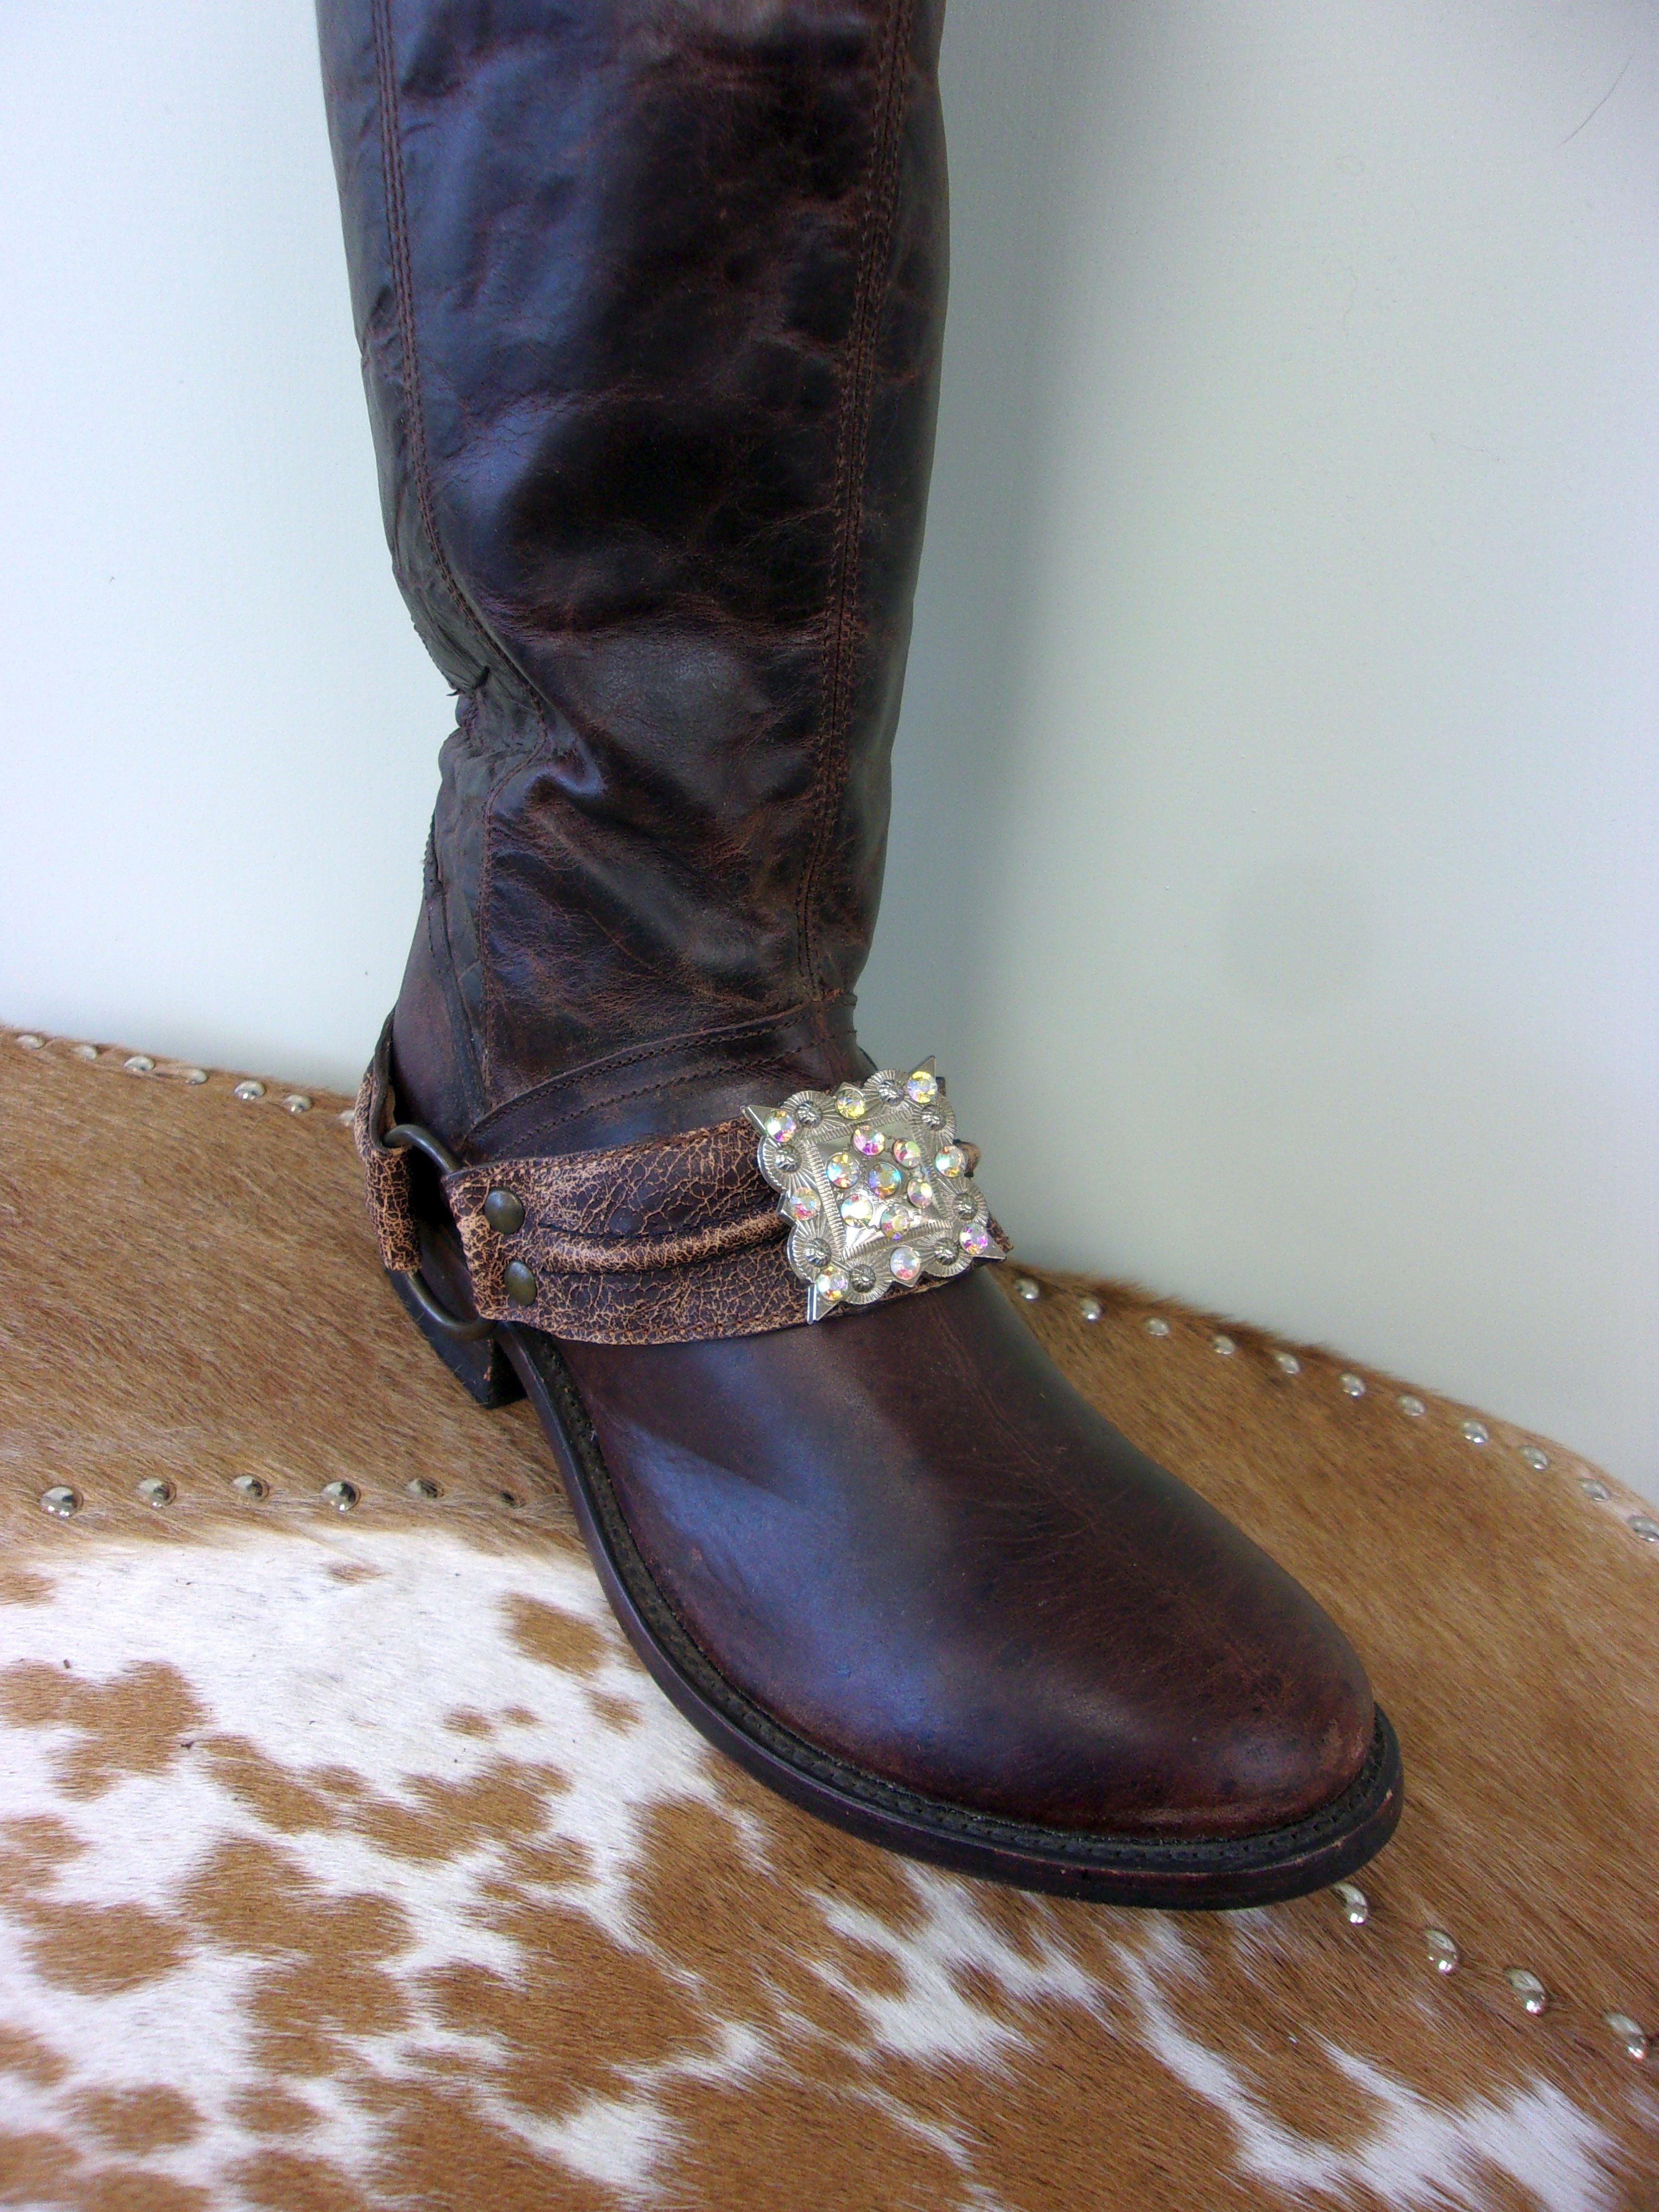 Boot Decoration - Boot Wrap - Boot Bling - Boot Jewelry - Boot Bracelet (Single) wr67 cowboy boot purses, western fringe purse, handmade leather purses, boot purse, handmade western purse, custom leather handbags Chris Thompson Bags